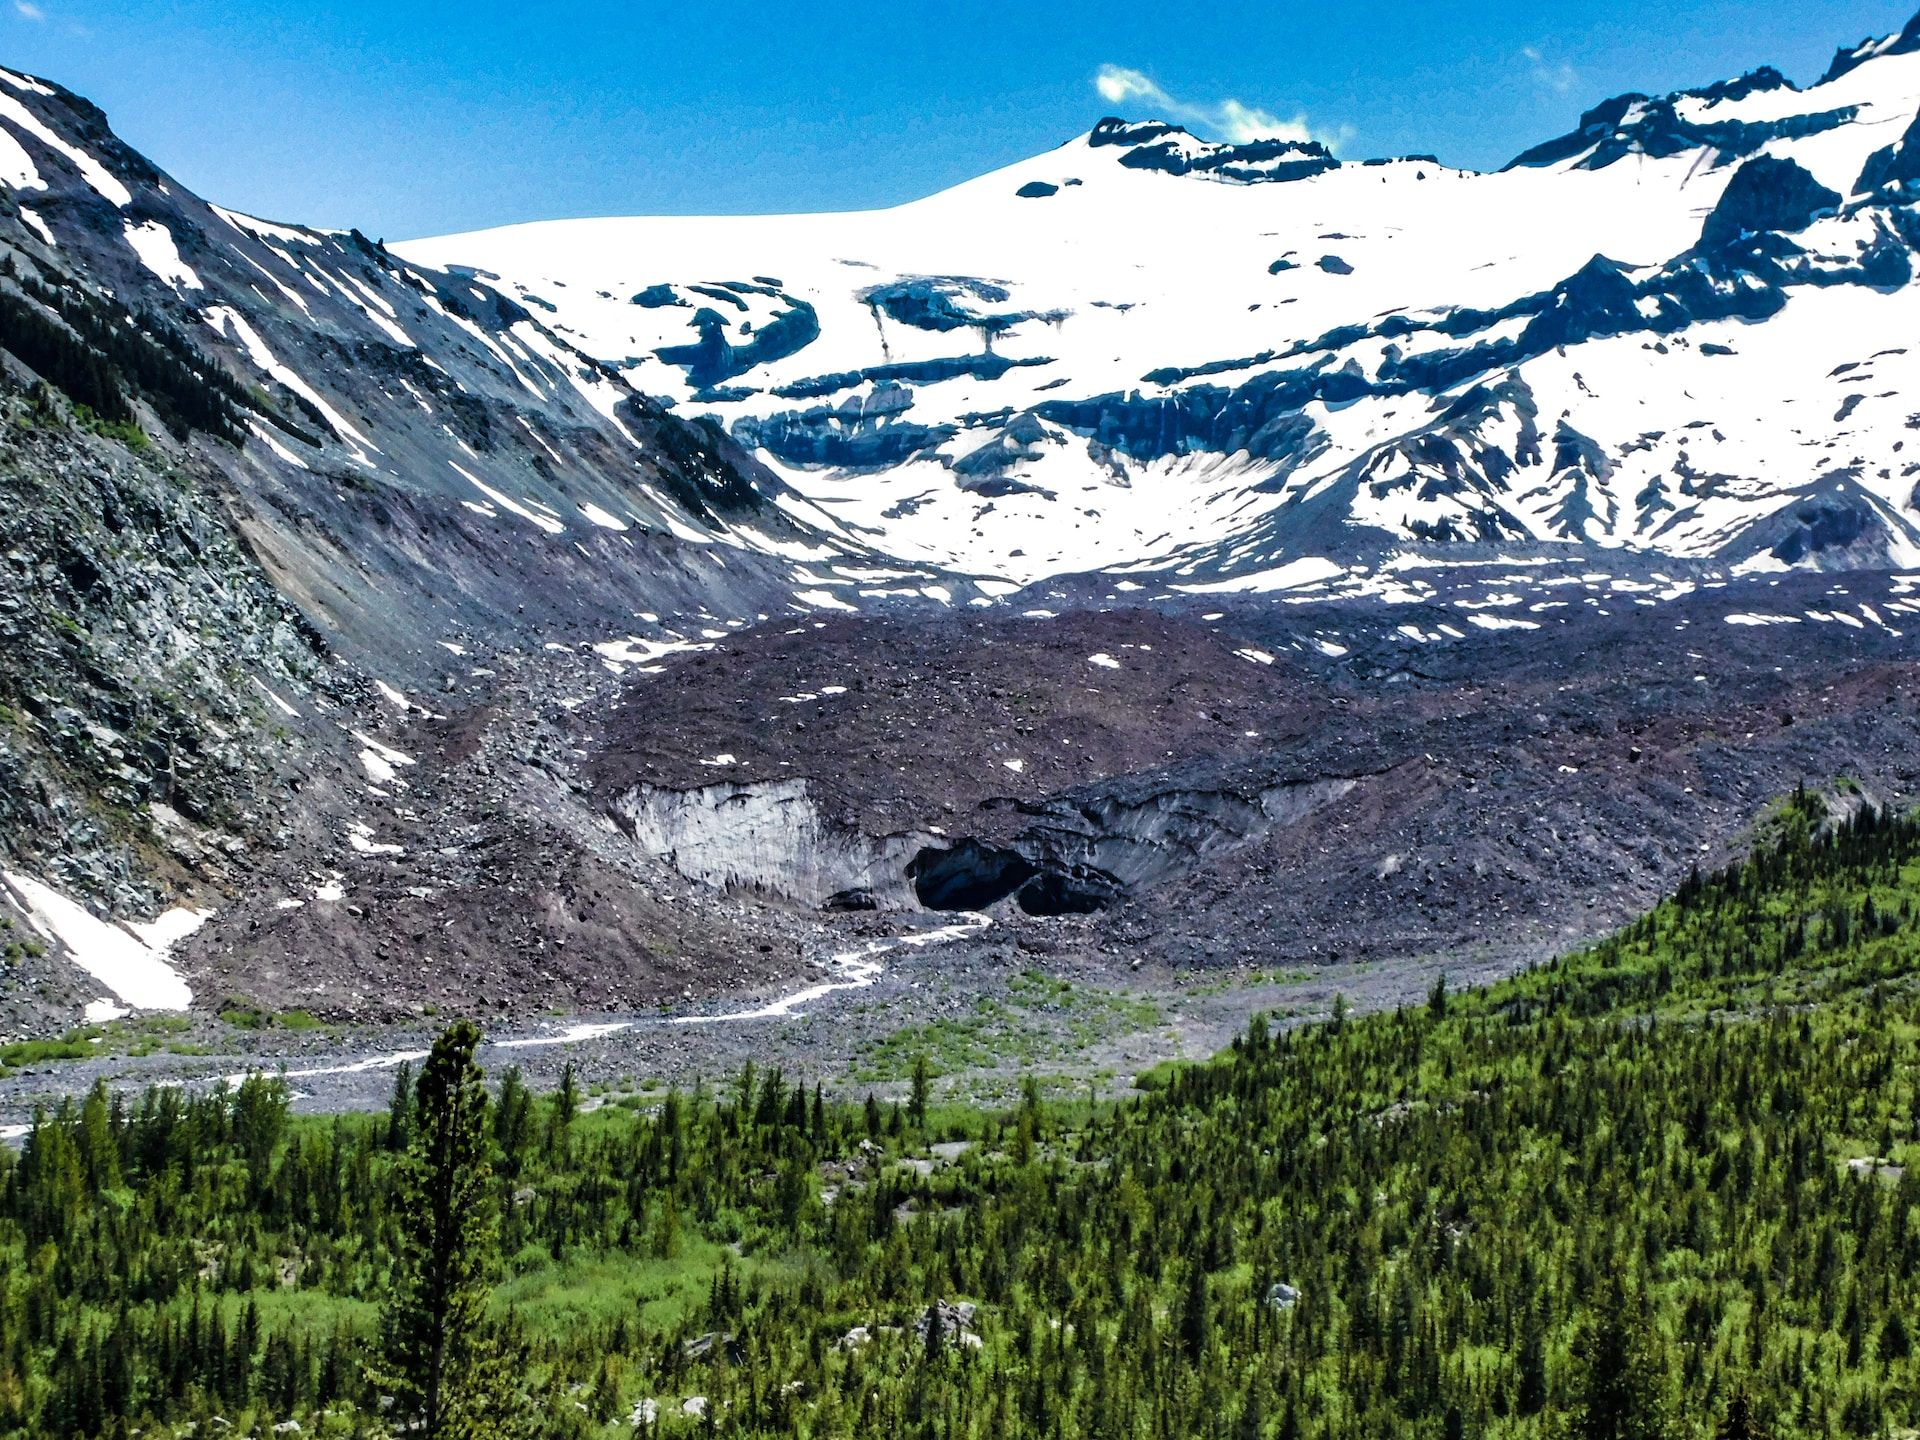 A view of Emmons Glacier Valley in Mt Rainier National Park